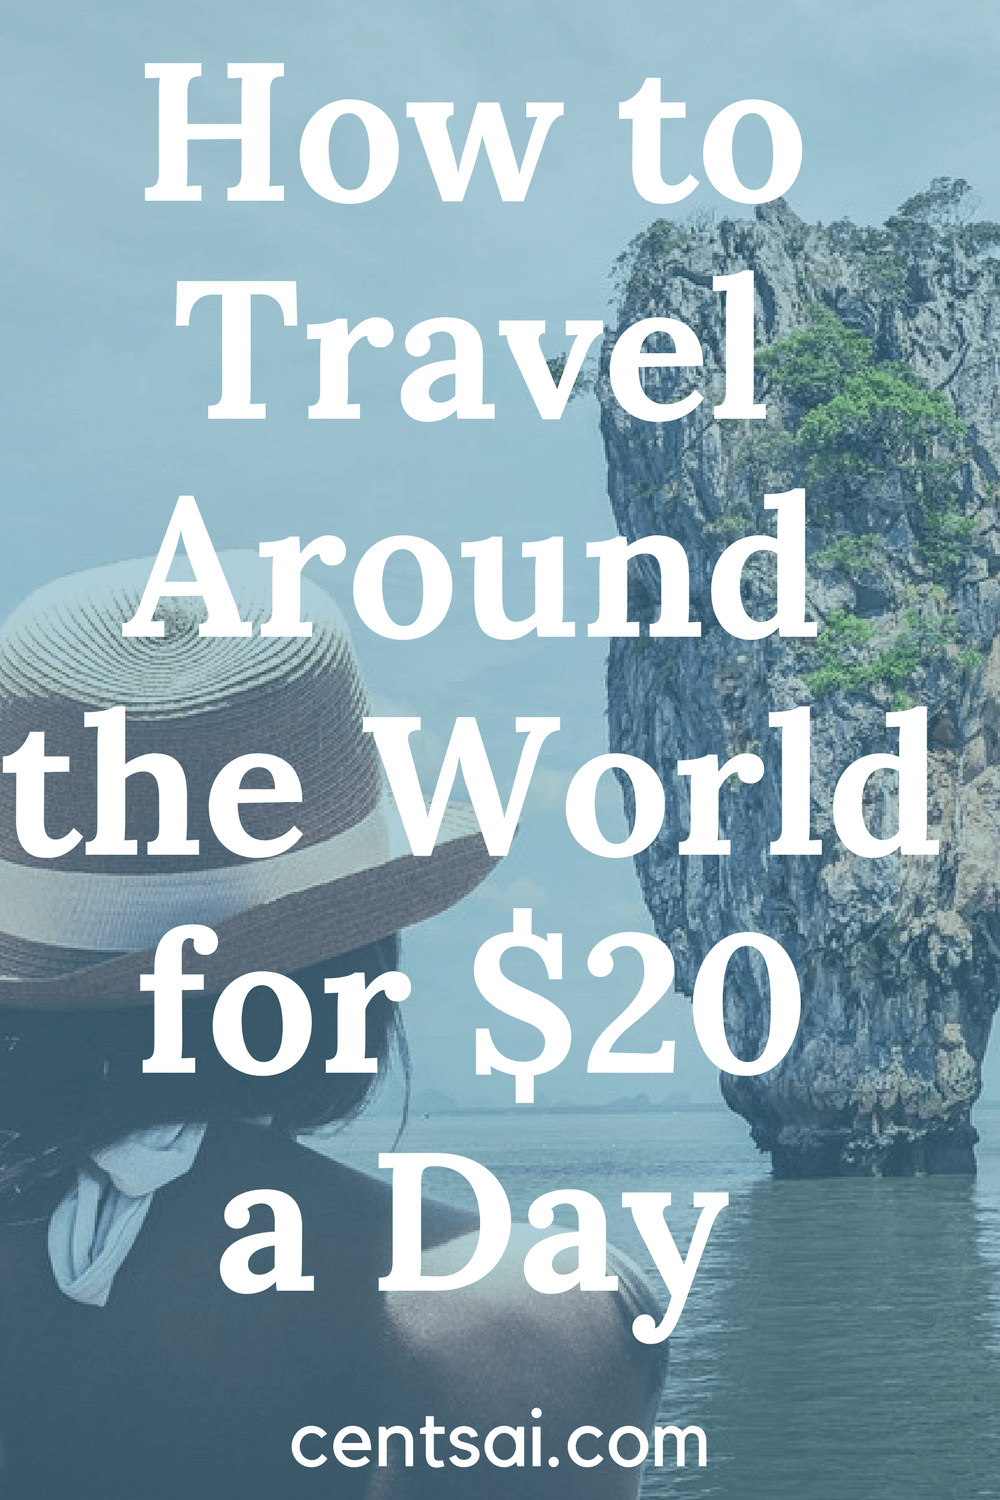 How to Travel Around the World for $20 a Day